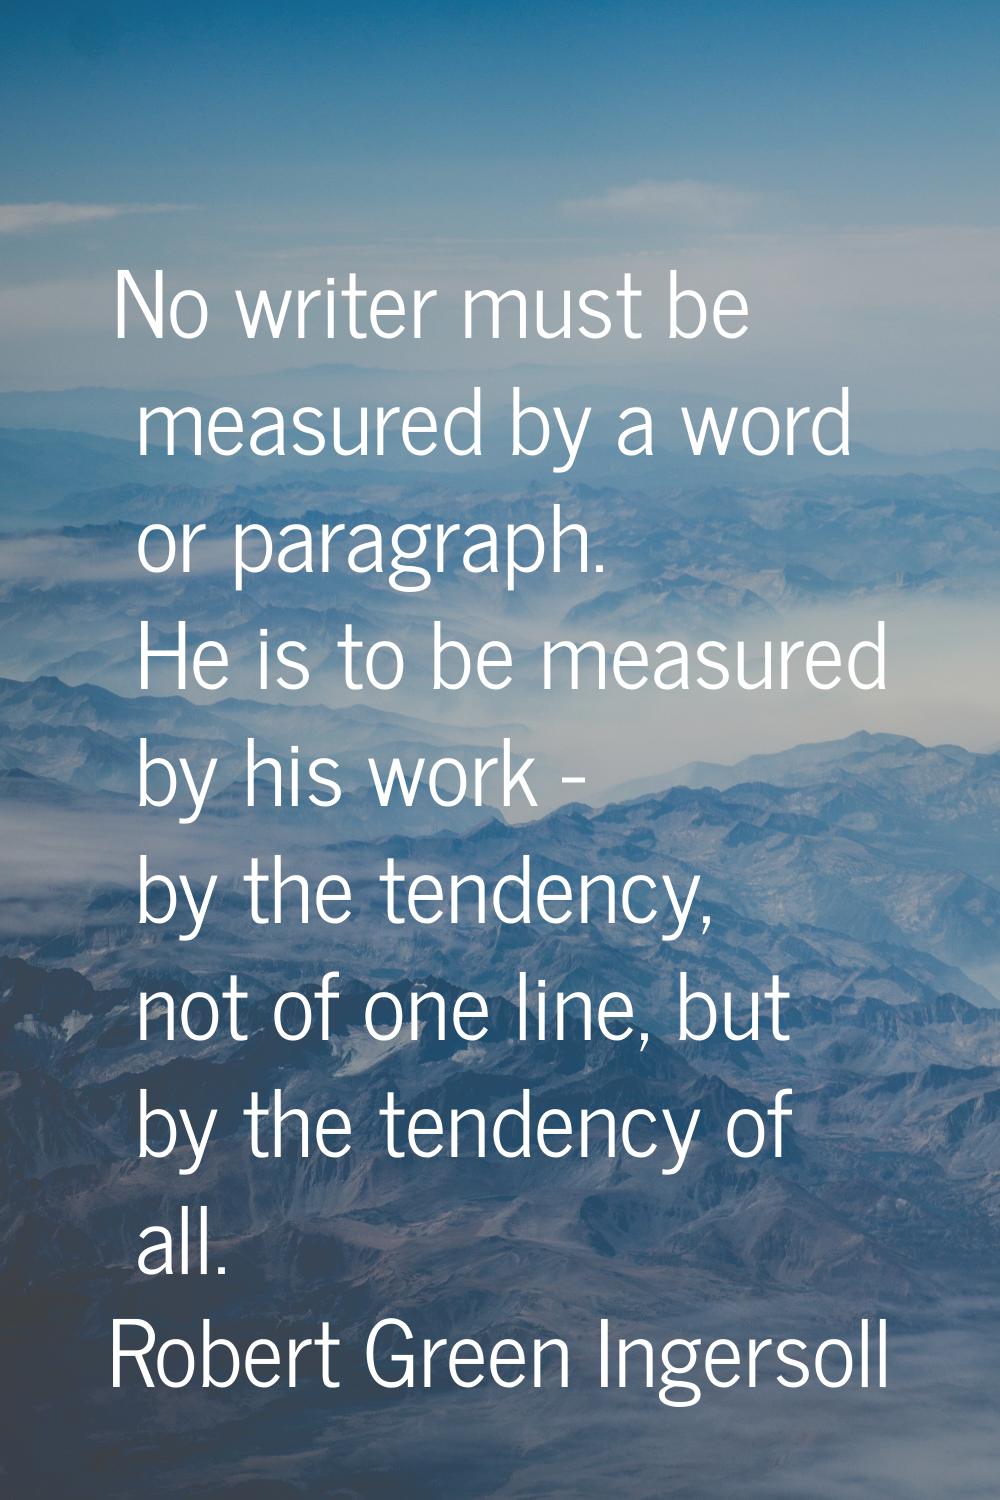 No writer must be measured by a word or paragraph. He is to be measured by his work - by the tenden